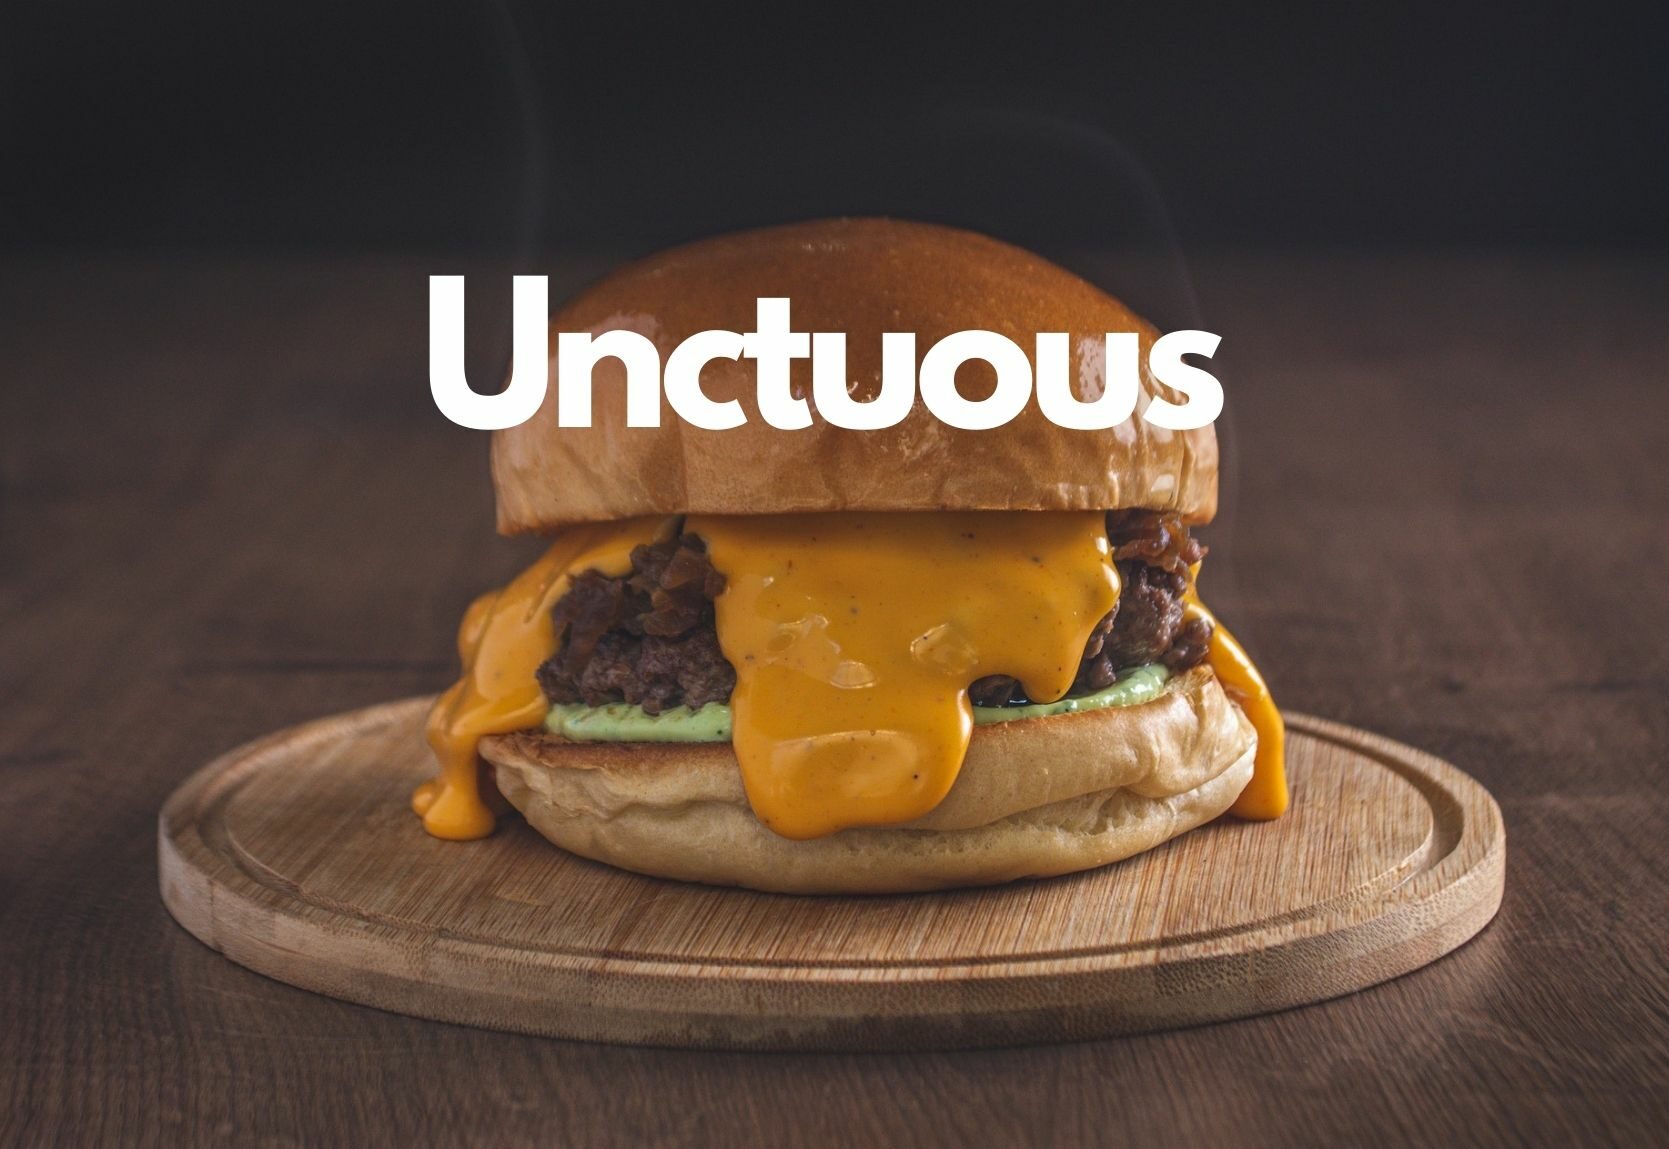 Graphic with a greasy burger and the word "Unctuous"